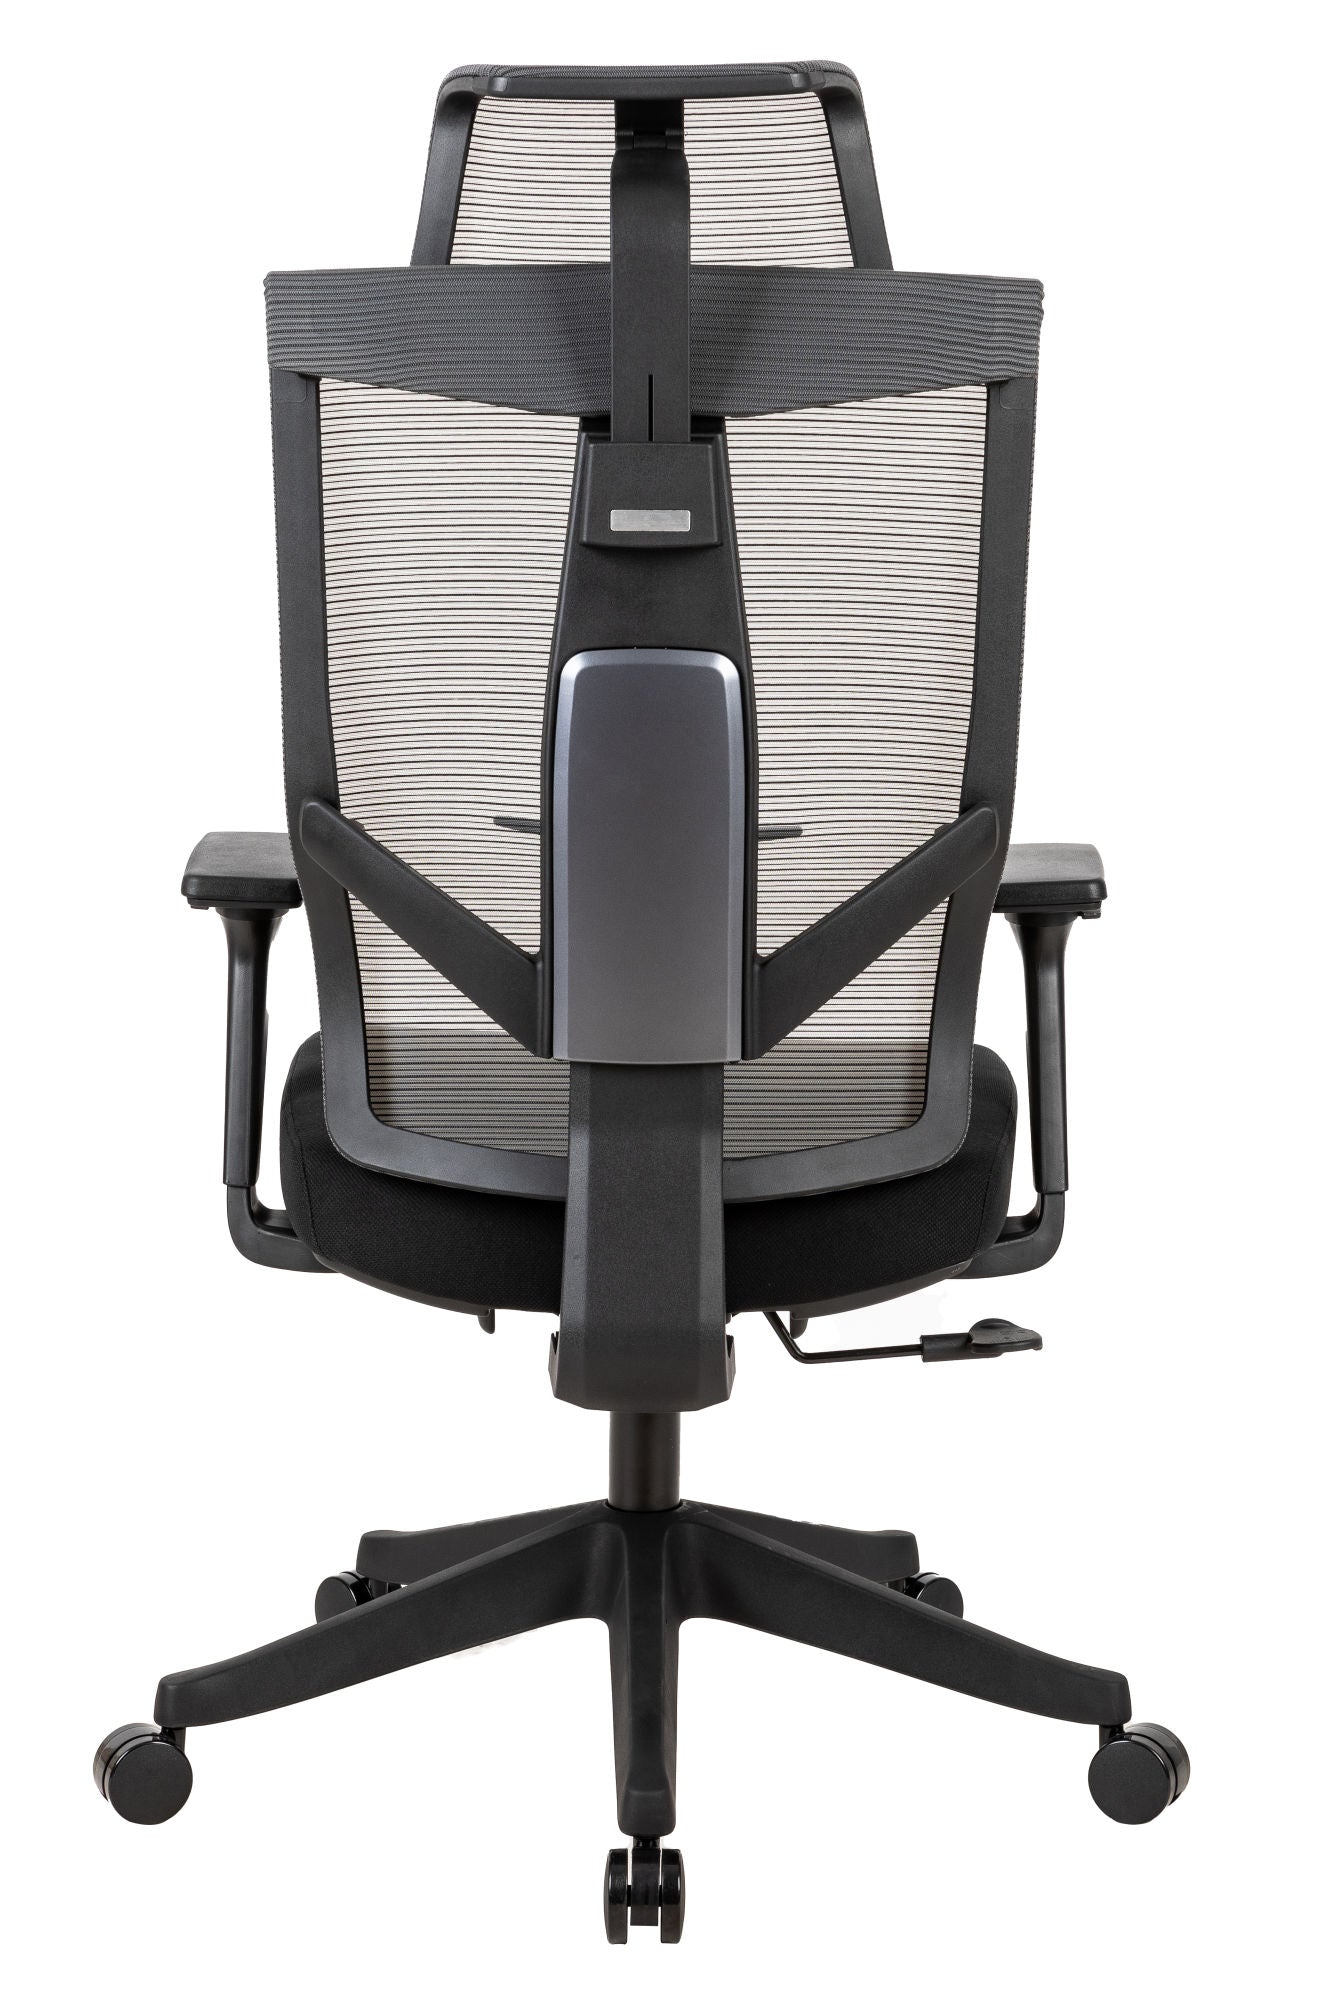 High back excusive office chair with head rest  and 4 level locked; color black; 300lbs